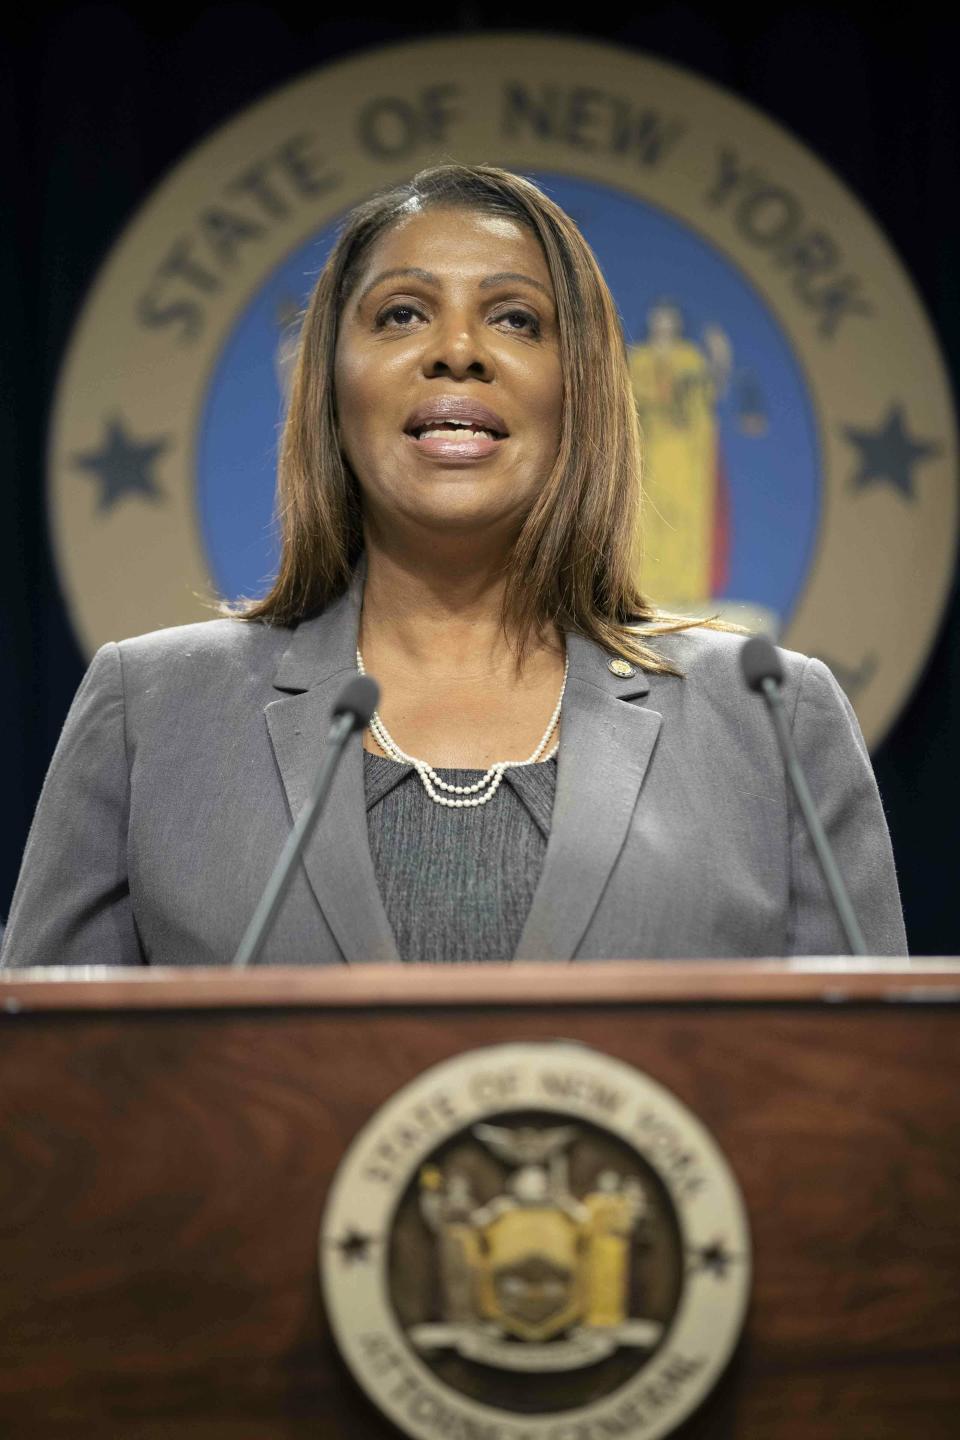 New York Attorney General Letitia James speaks during a news conference, Tuesday, June 11, 2019, in New York. A group of state attorneys general led by New York and California filed a federal lawsuit Tuesday to block T-Mobile's $26.5 billion bid for Sprint, citing consumer harm. (AP Photo/Mary Altaffer)